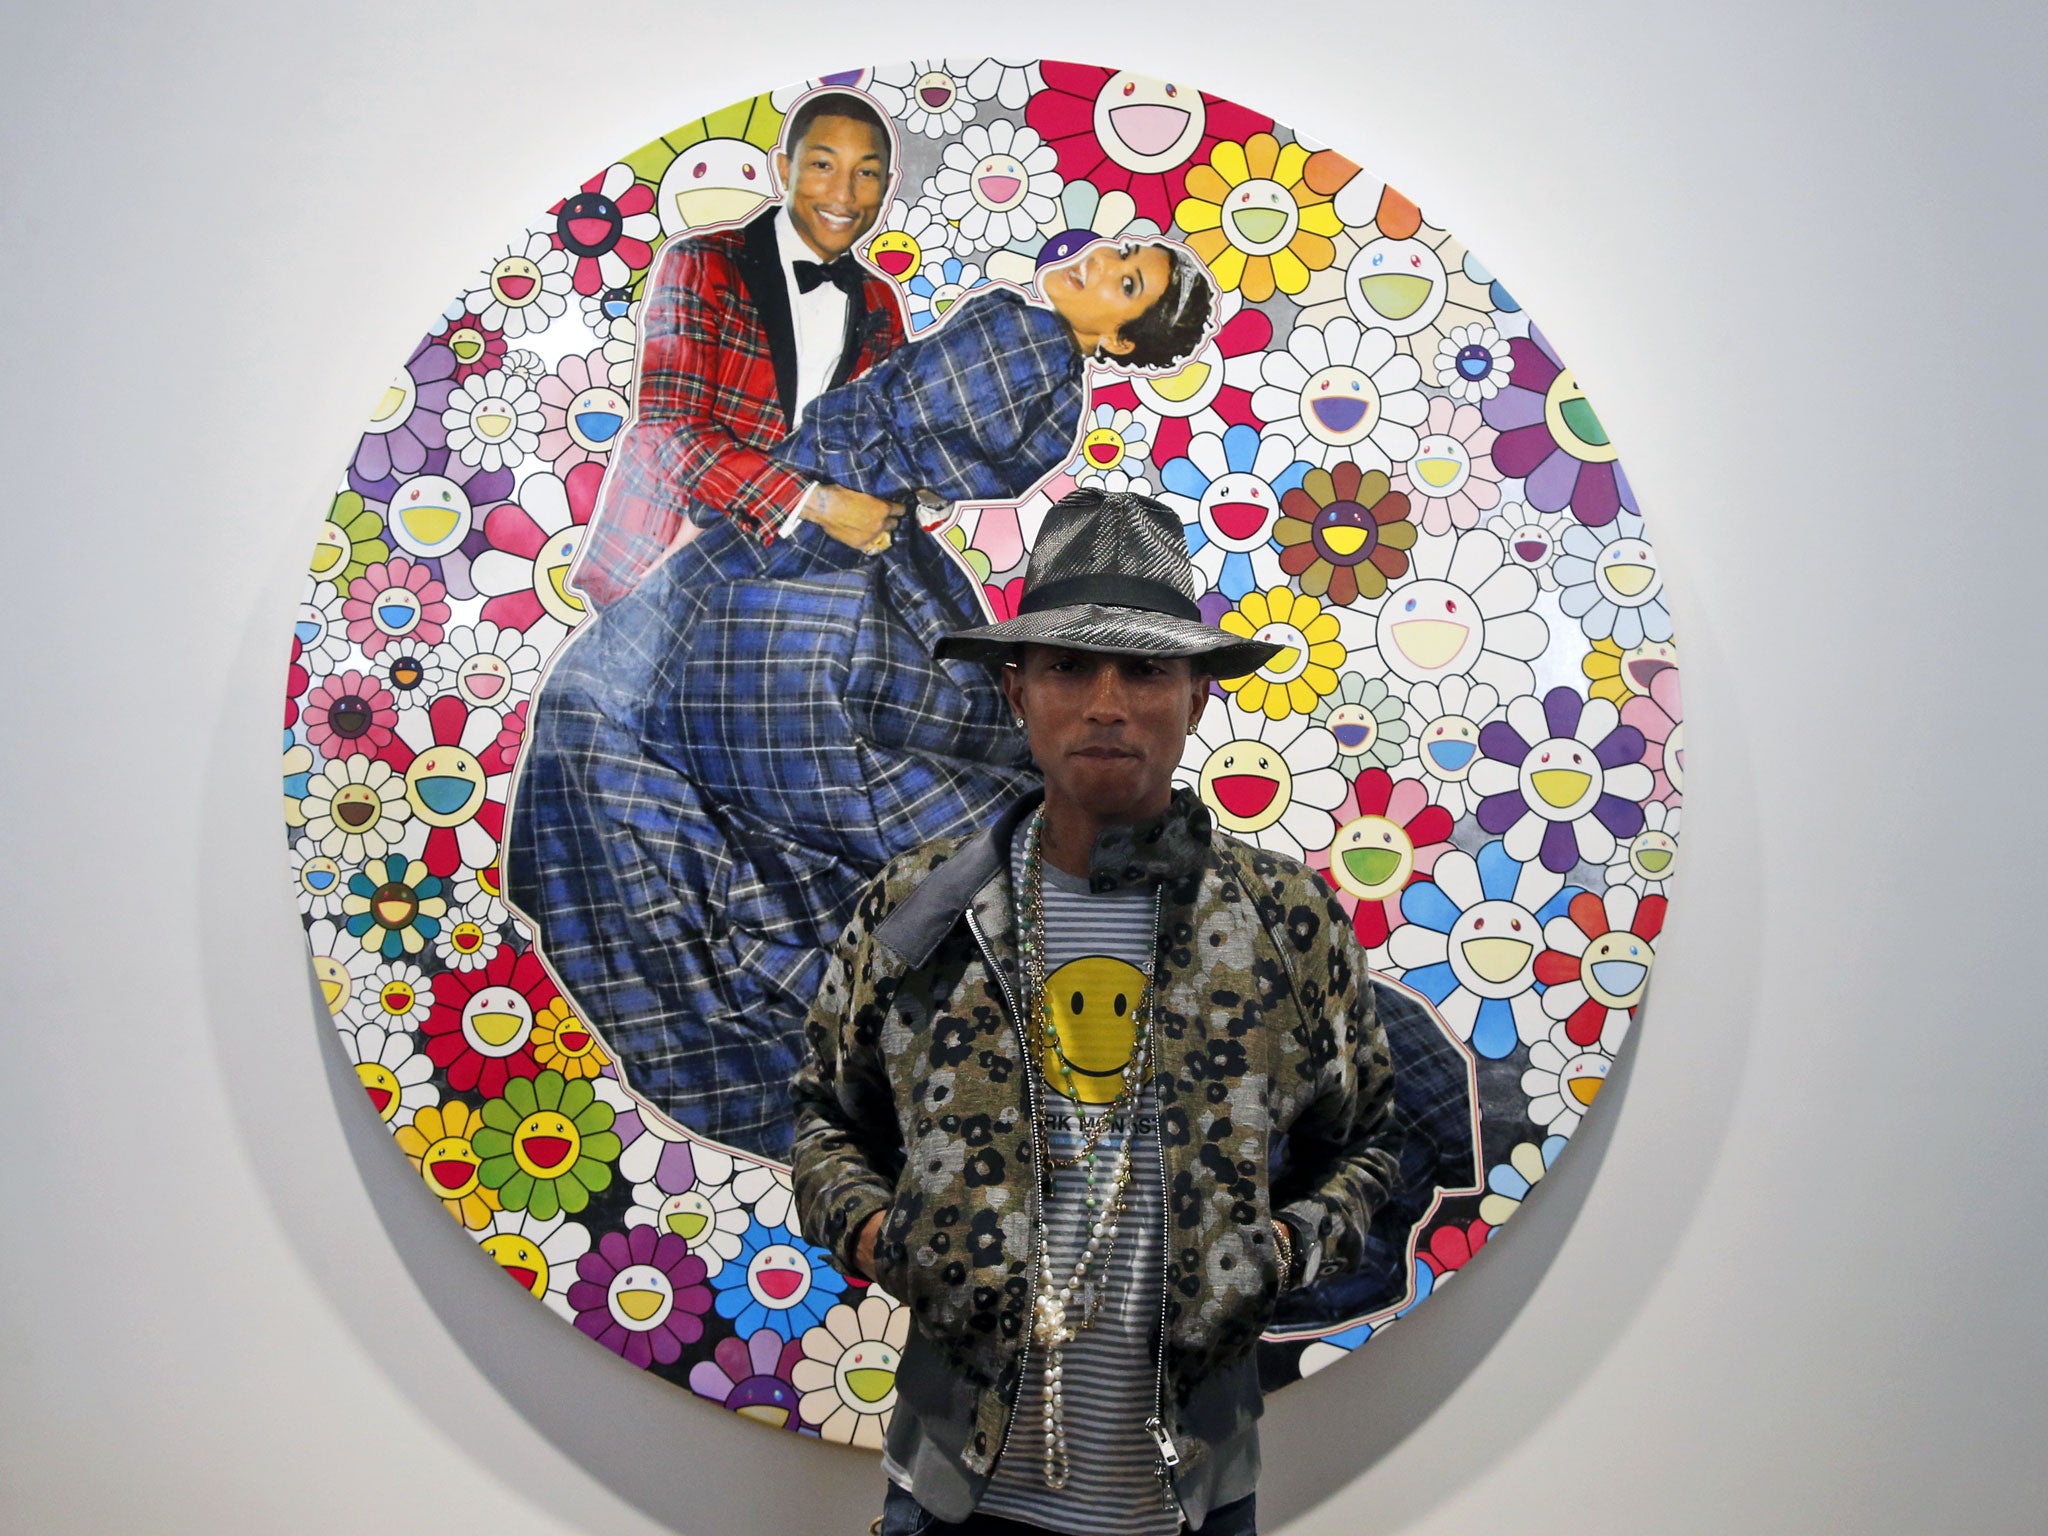 US singer Pharrell Williams poses during a press conference for the exhibition "GIRL" at the Perrotin Gallery in Paris